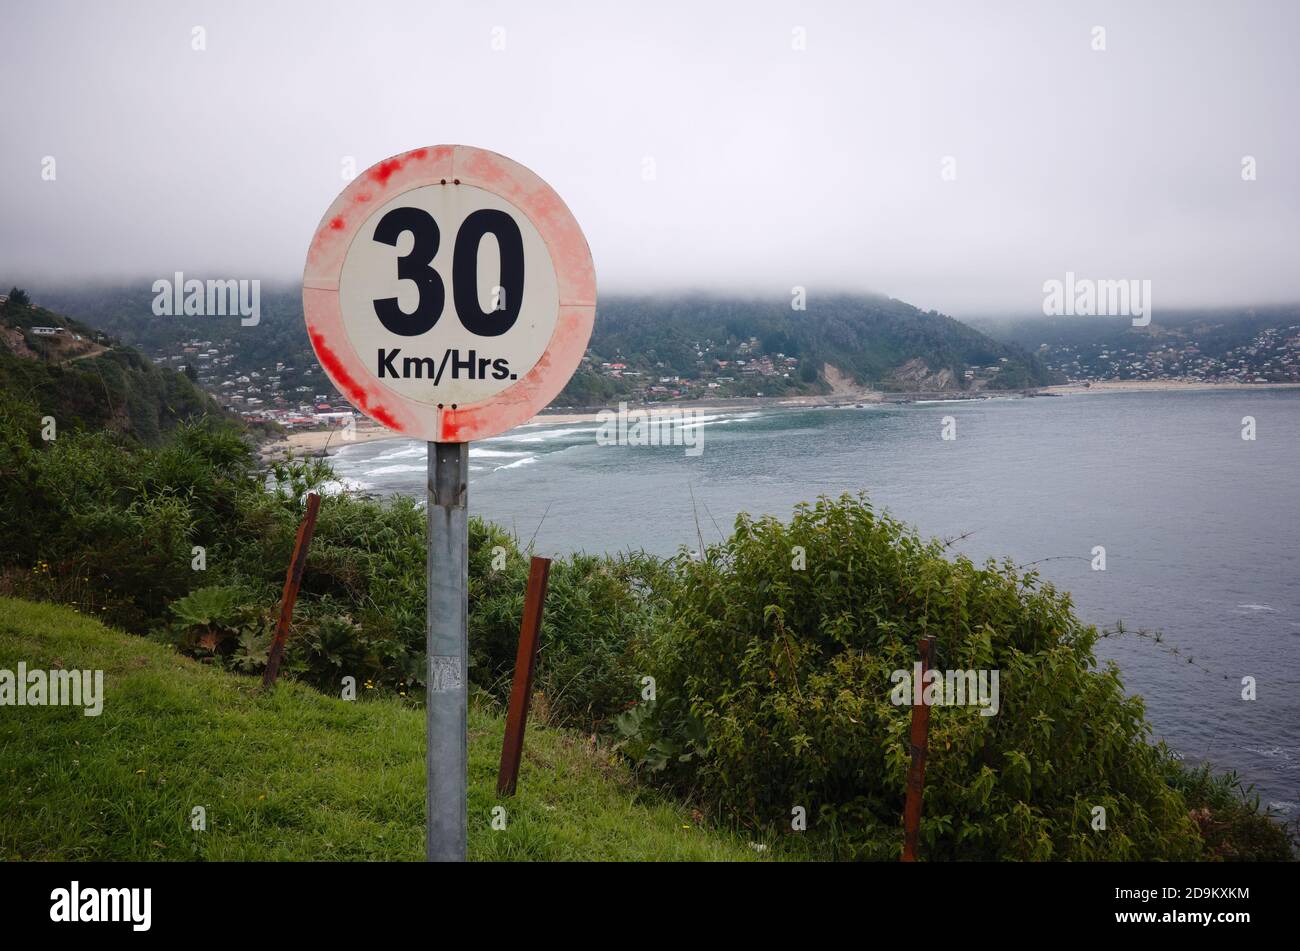 Speed limit sign on a sharp turn before cliff. 30 km per hour speed limit on mountain road. Ocean beach and small village in a fog on background. Stock Photo